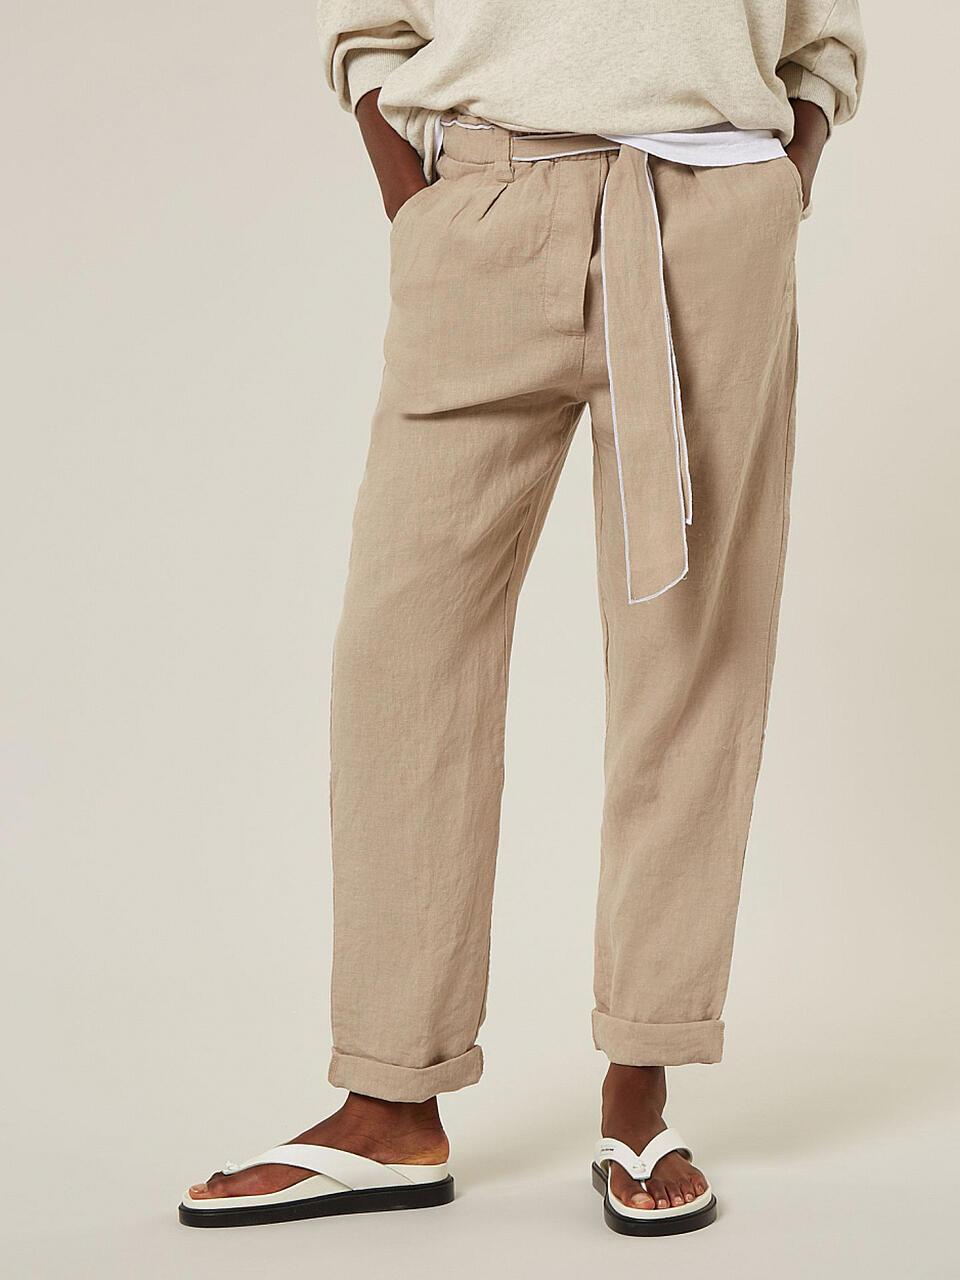 10 DAYS Leinenhose Relaxed Fit beige